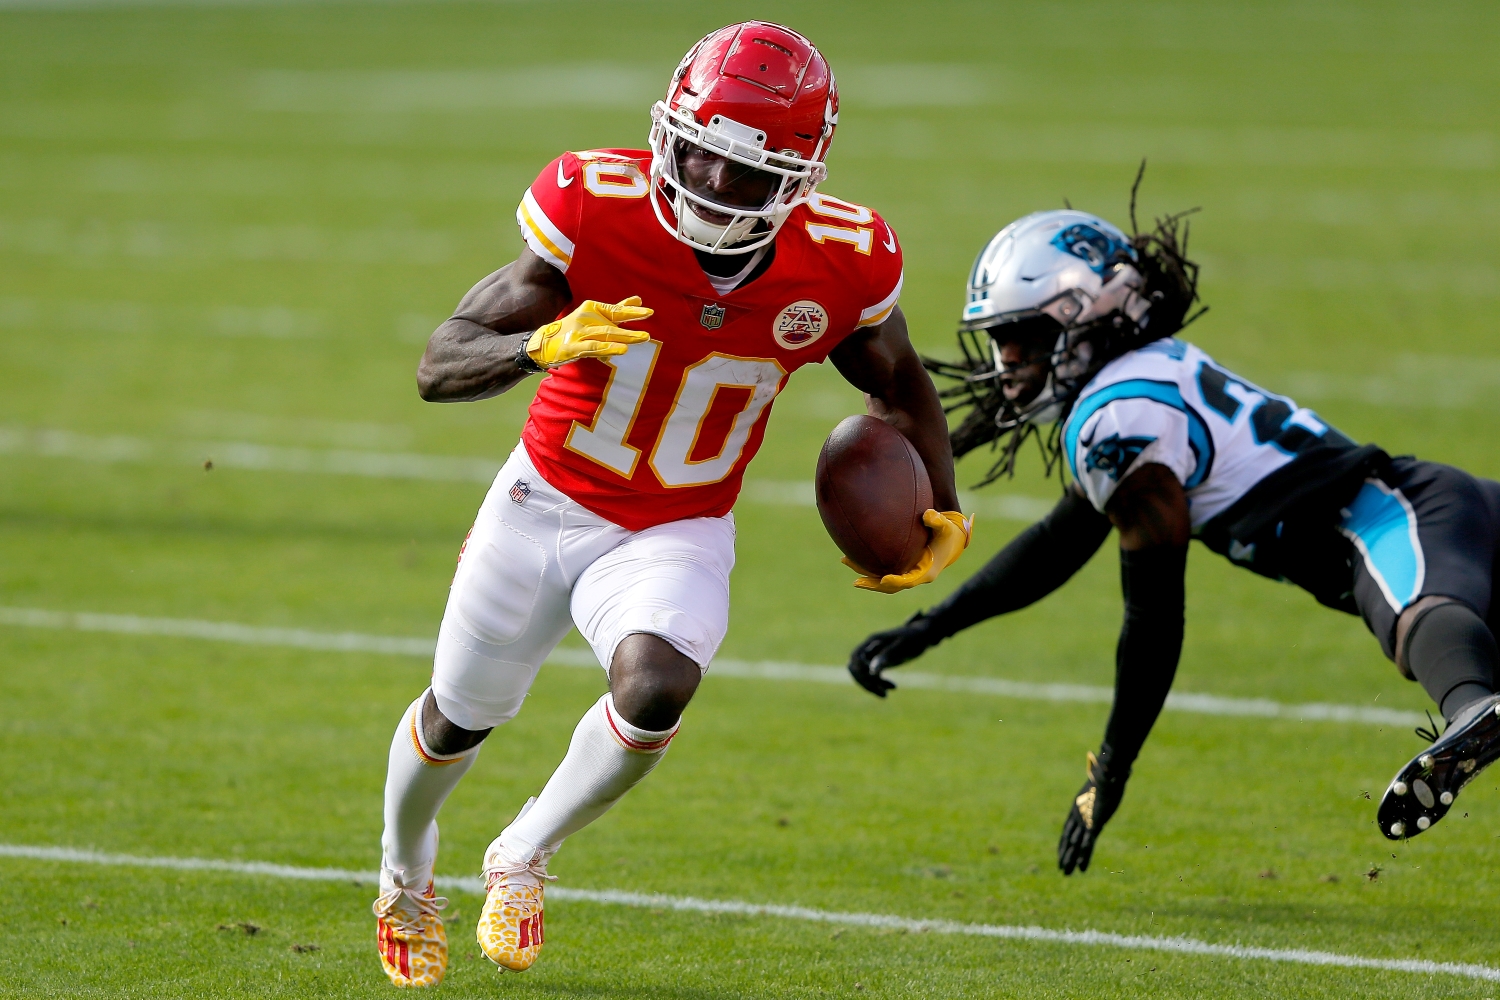 Tyreek Hill of the Kansas City Chiefs carries the ball after making a catch against the Carolina Panthers in the second quarter at Arrowhead Stadium.